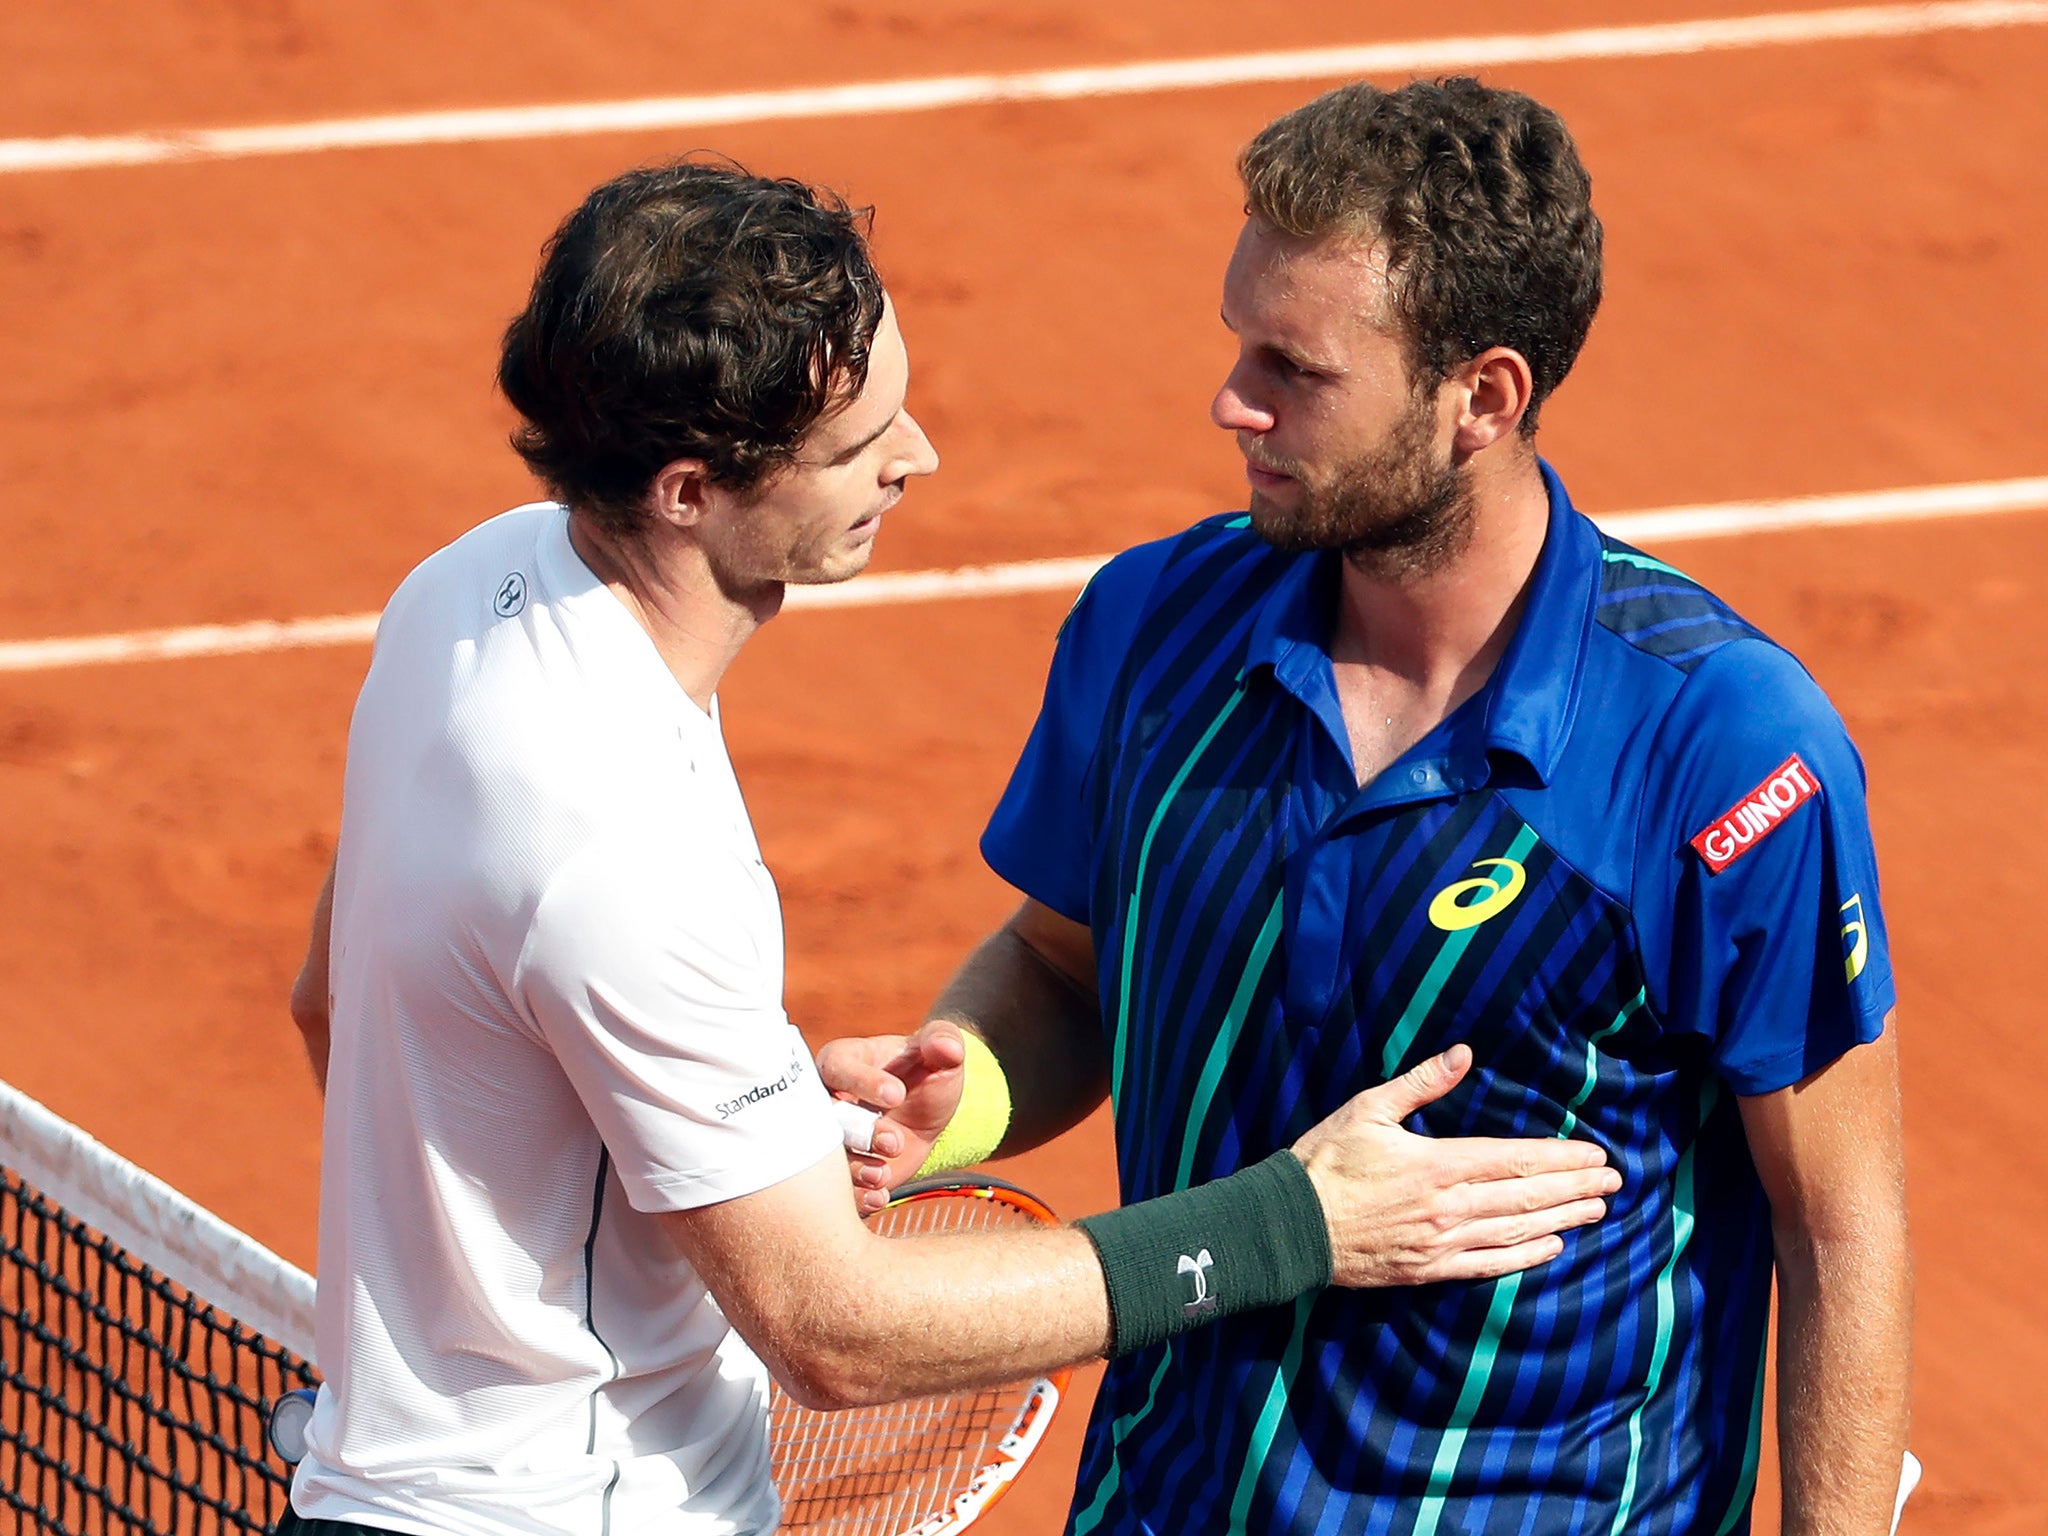 Murray speaks with Bourgue at the end of the match